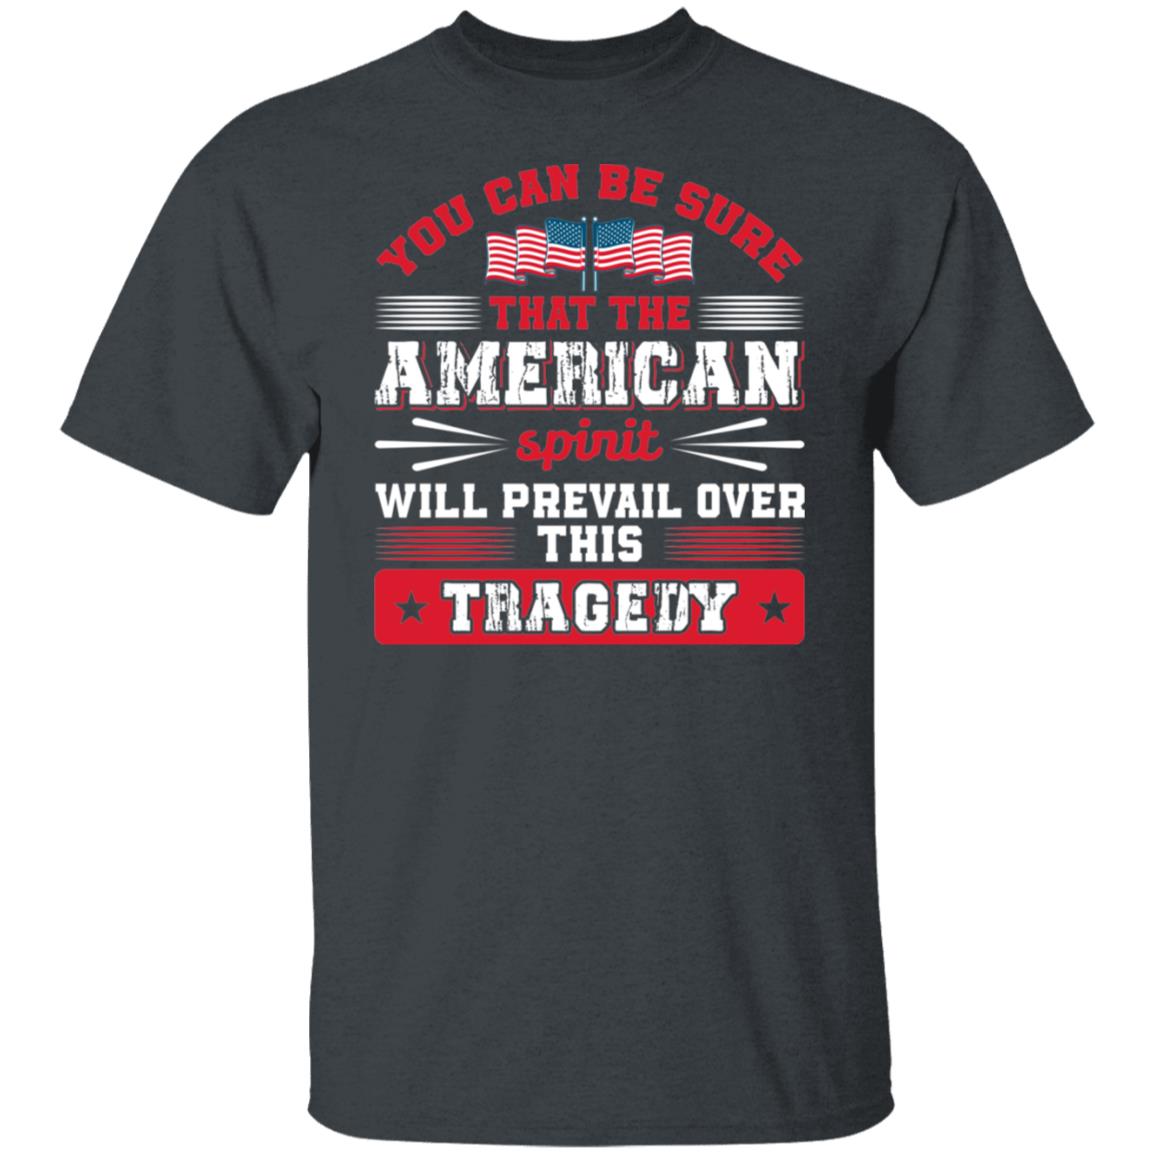 You Can Be Sure That The American Spirit Will Prevail over this Tragedy Shirt